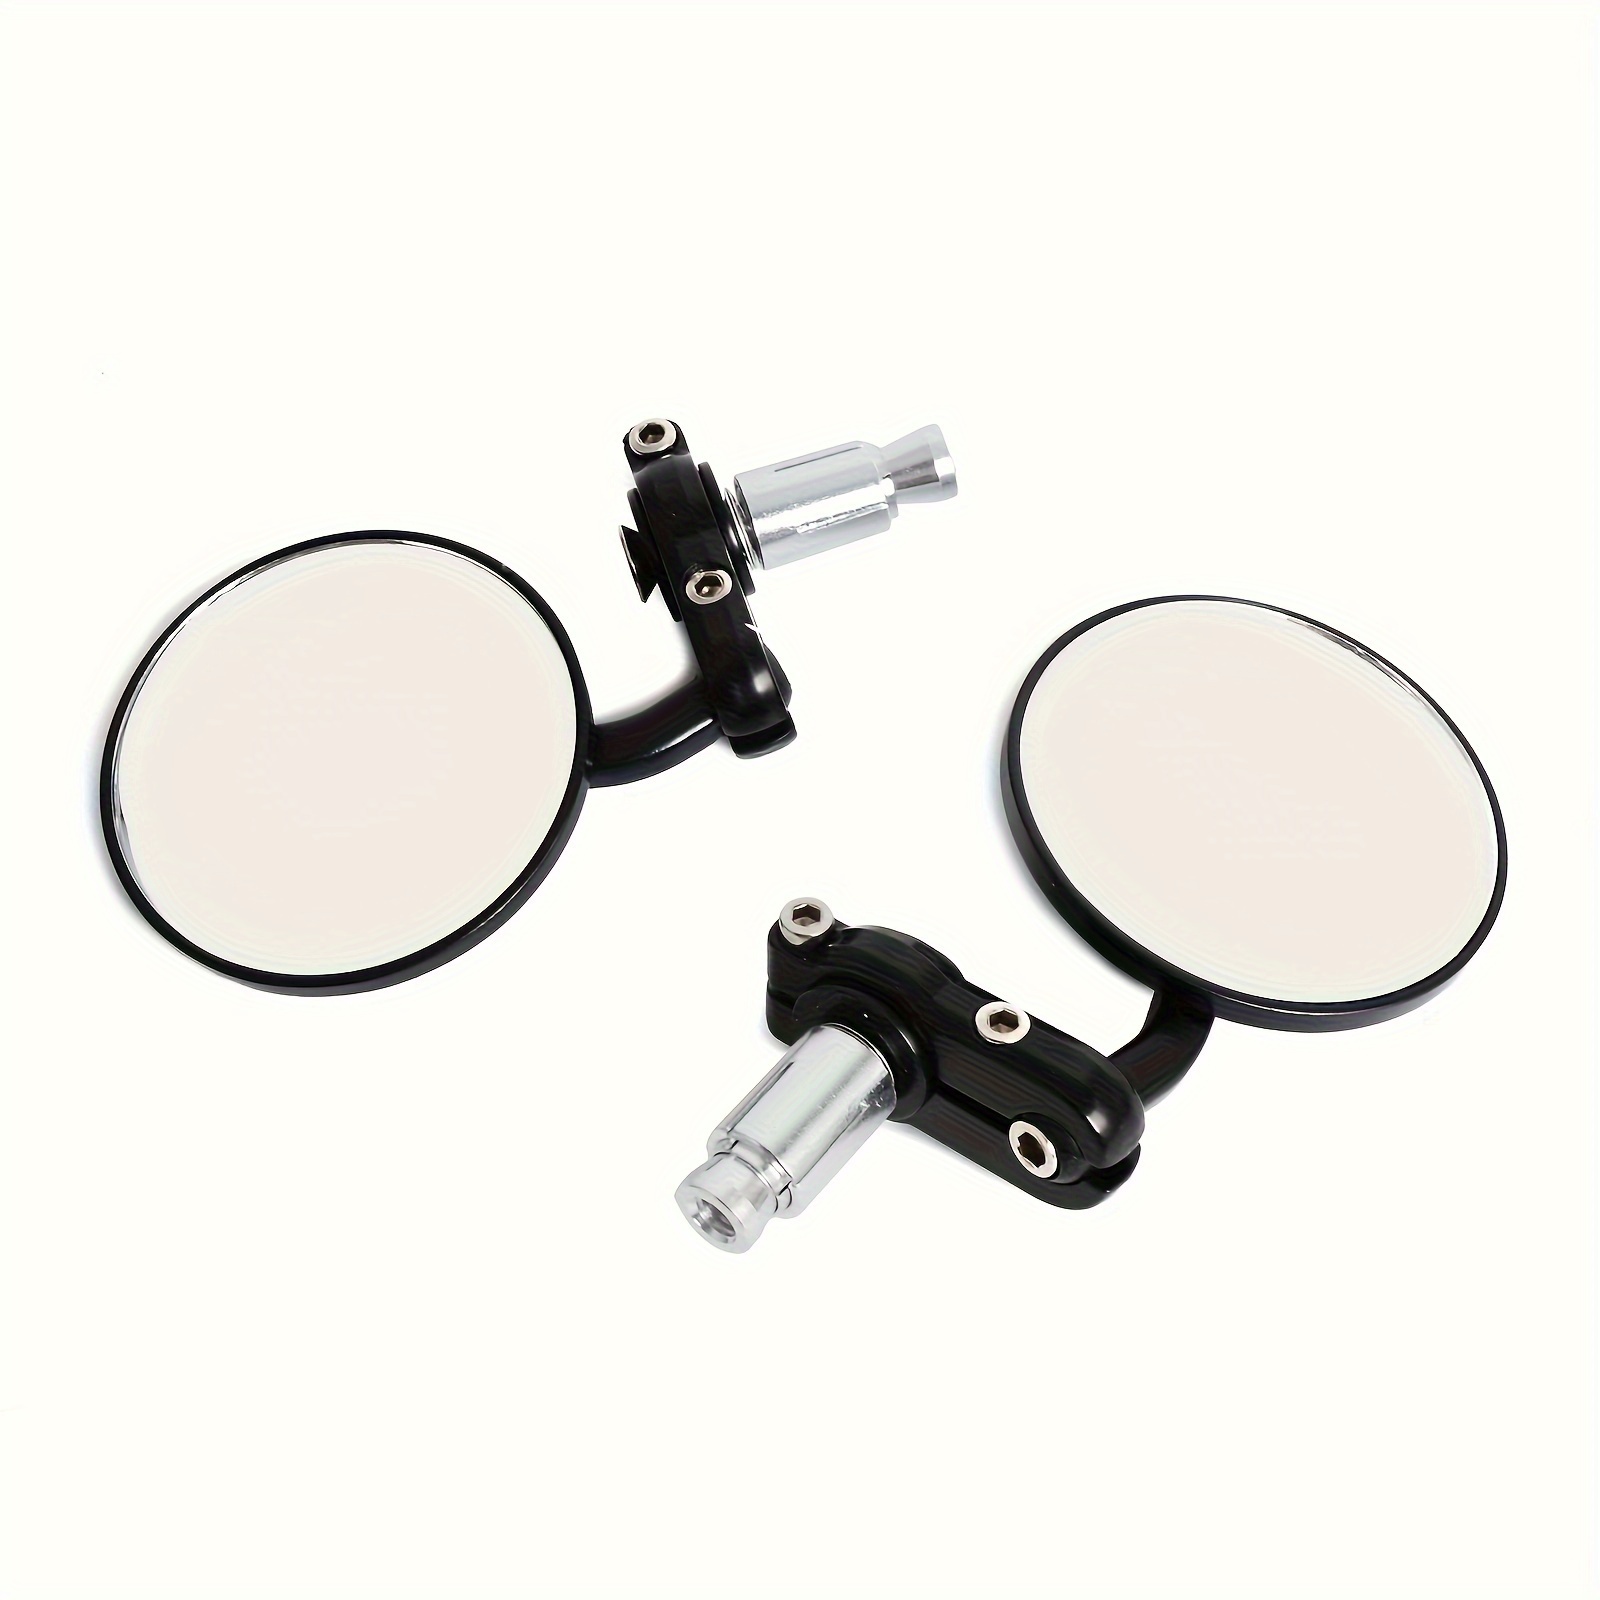 Universal Motorcycle Rear View Mirrors Round Folding Bar End